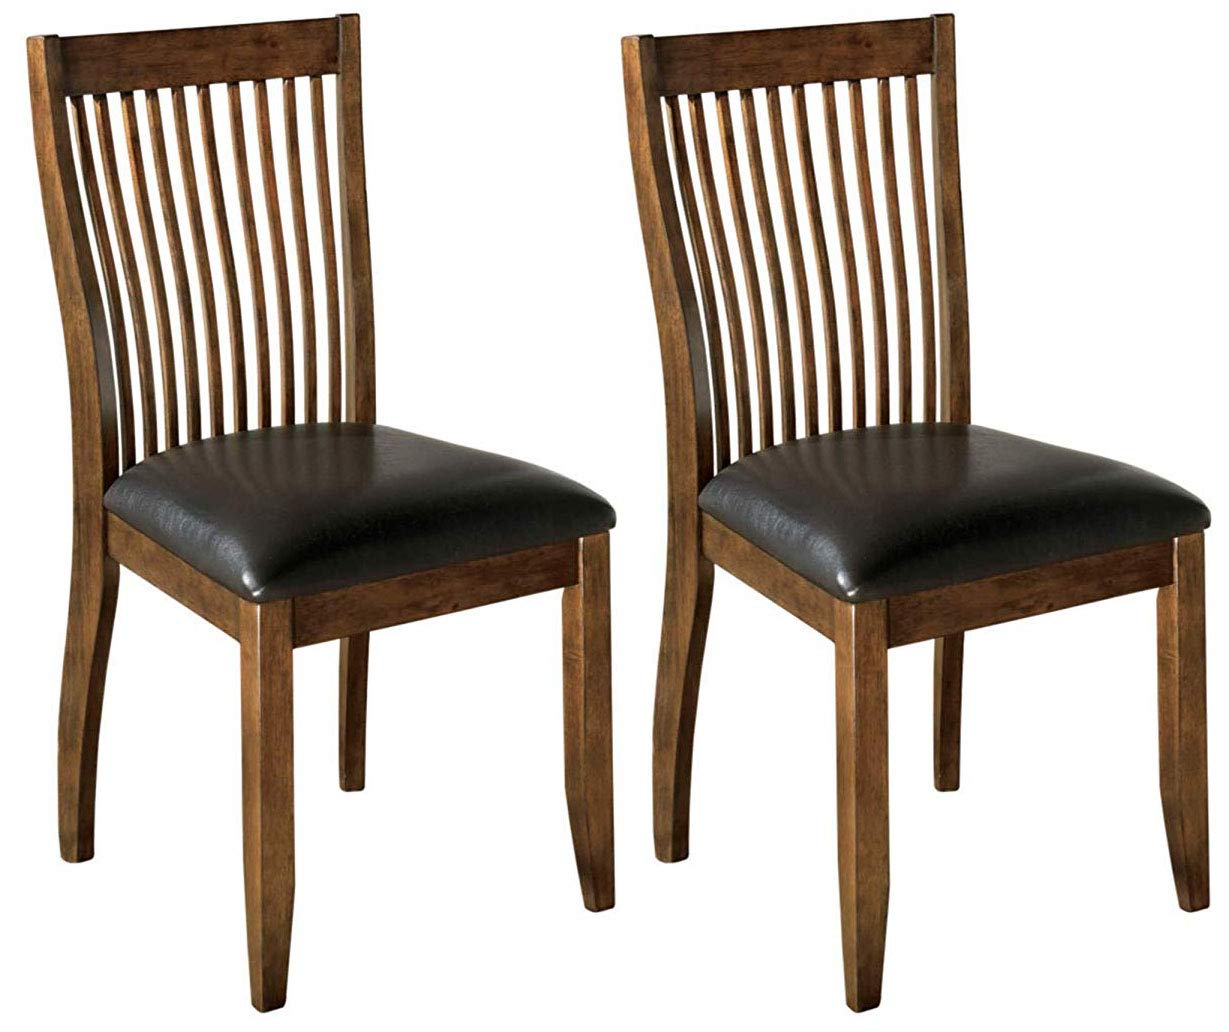 Ashley Furniture Signature Design - Stuman Dining Side Chair - Comb Back - Set of 2 - Brown Base and Black Upolstered Seat